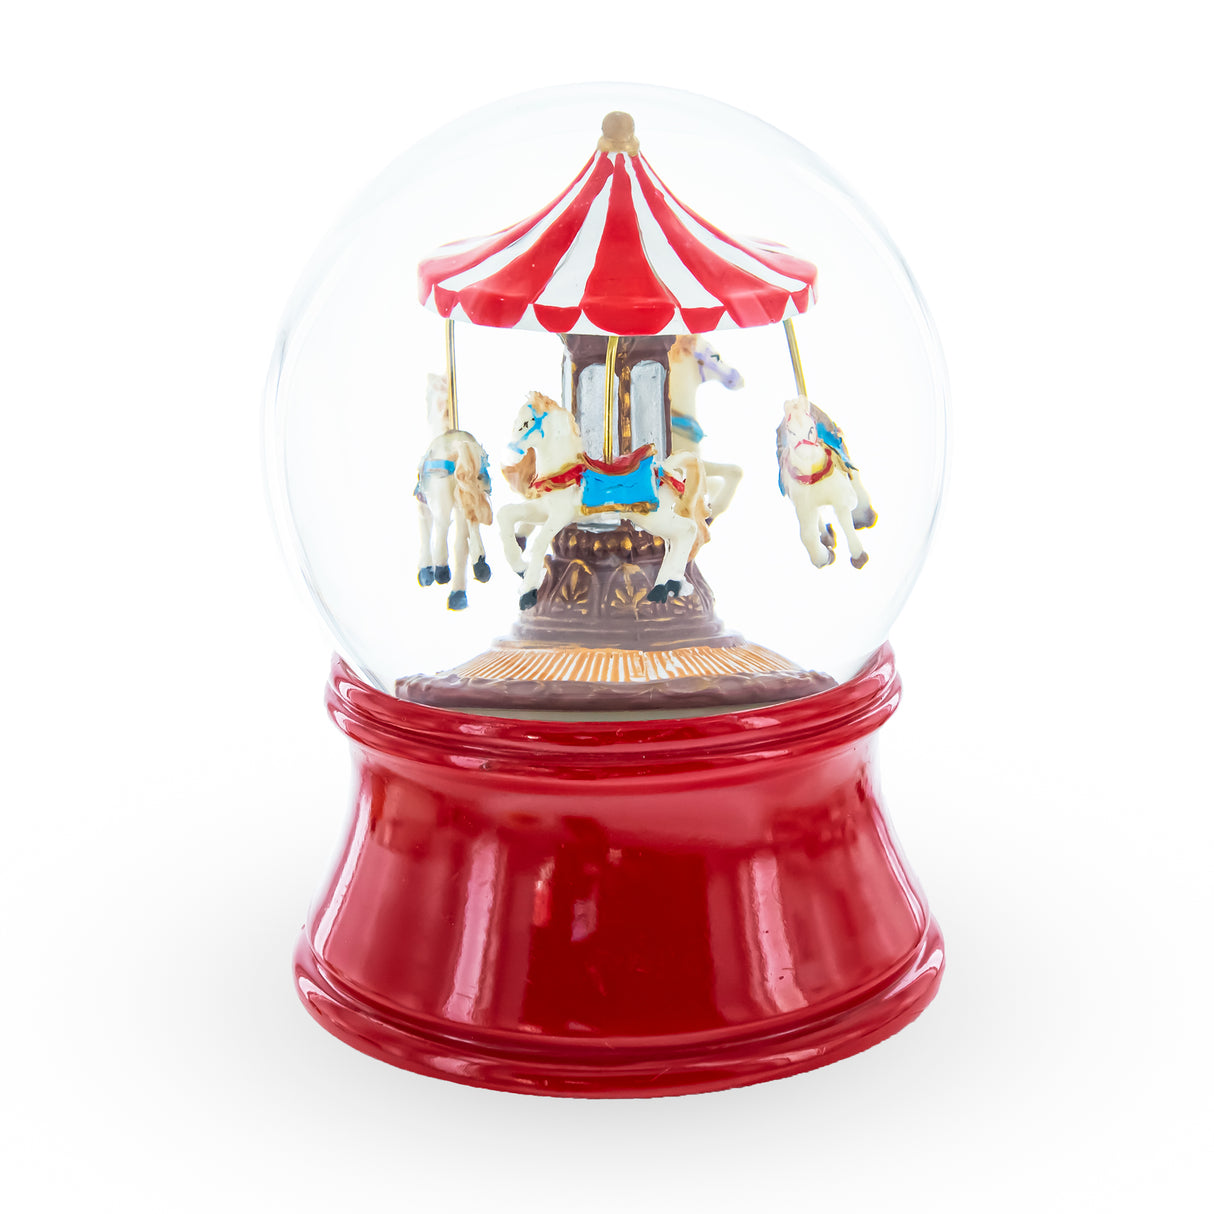 Resin Whirling Carousel: Wind-up Spinning Horses Musical Water Globe in Red color Round